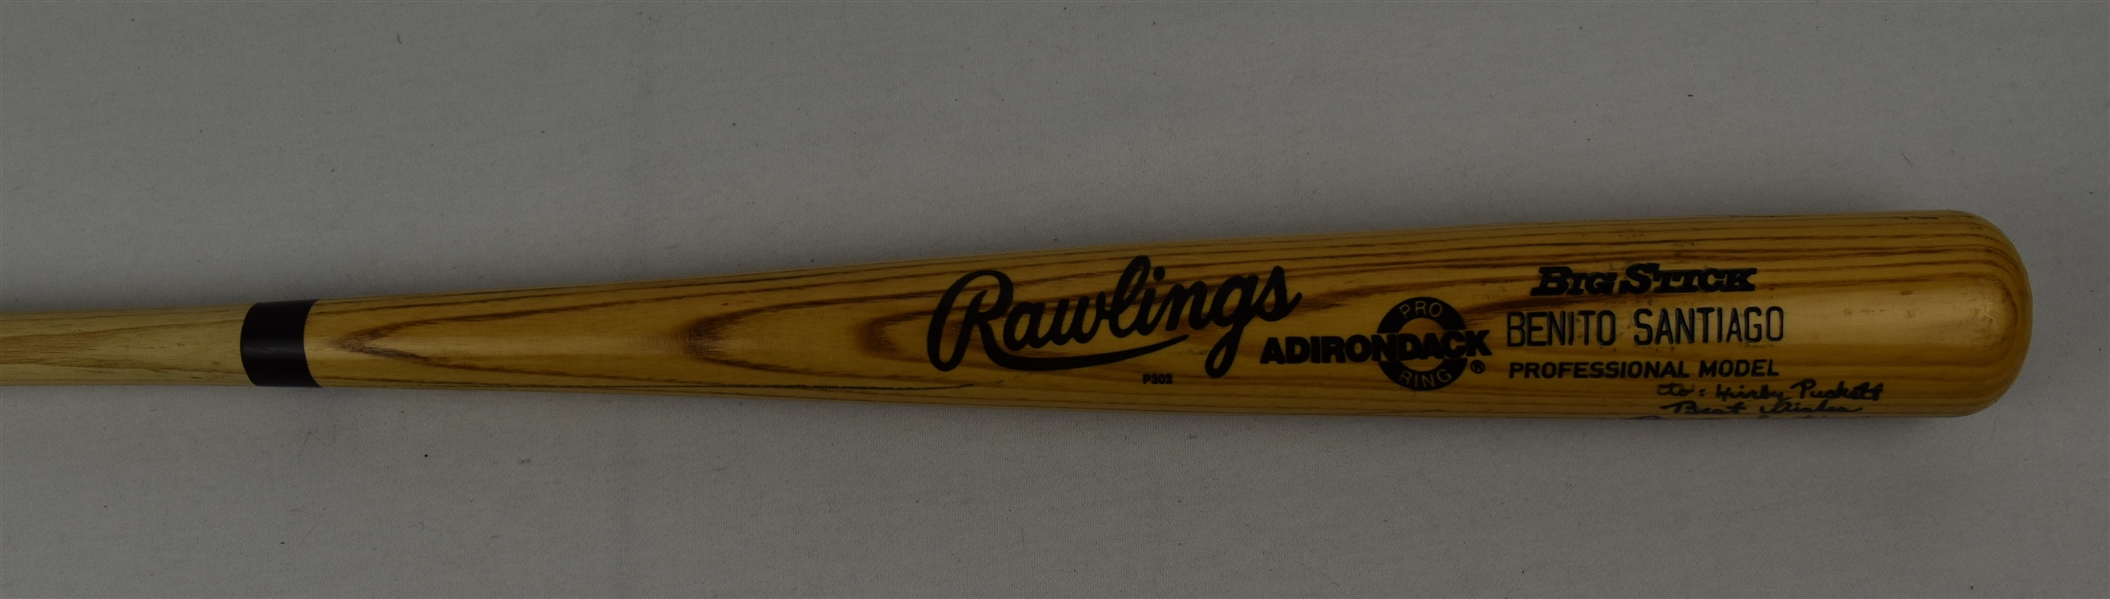 Benito Santiago Game Used & Autographed Bat w/Puckett Family Provenance